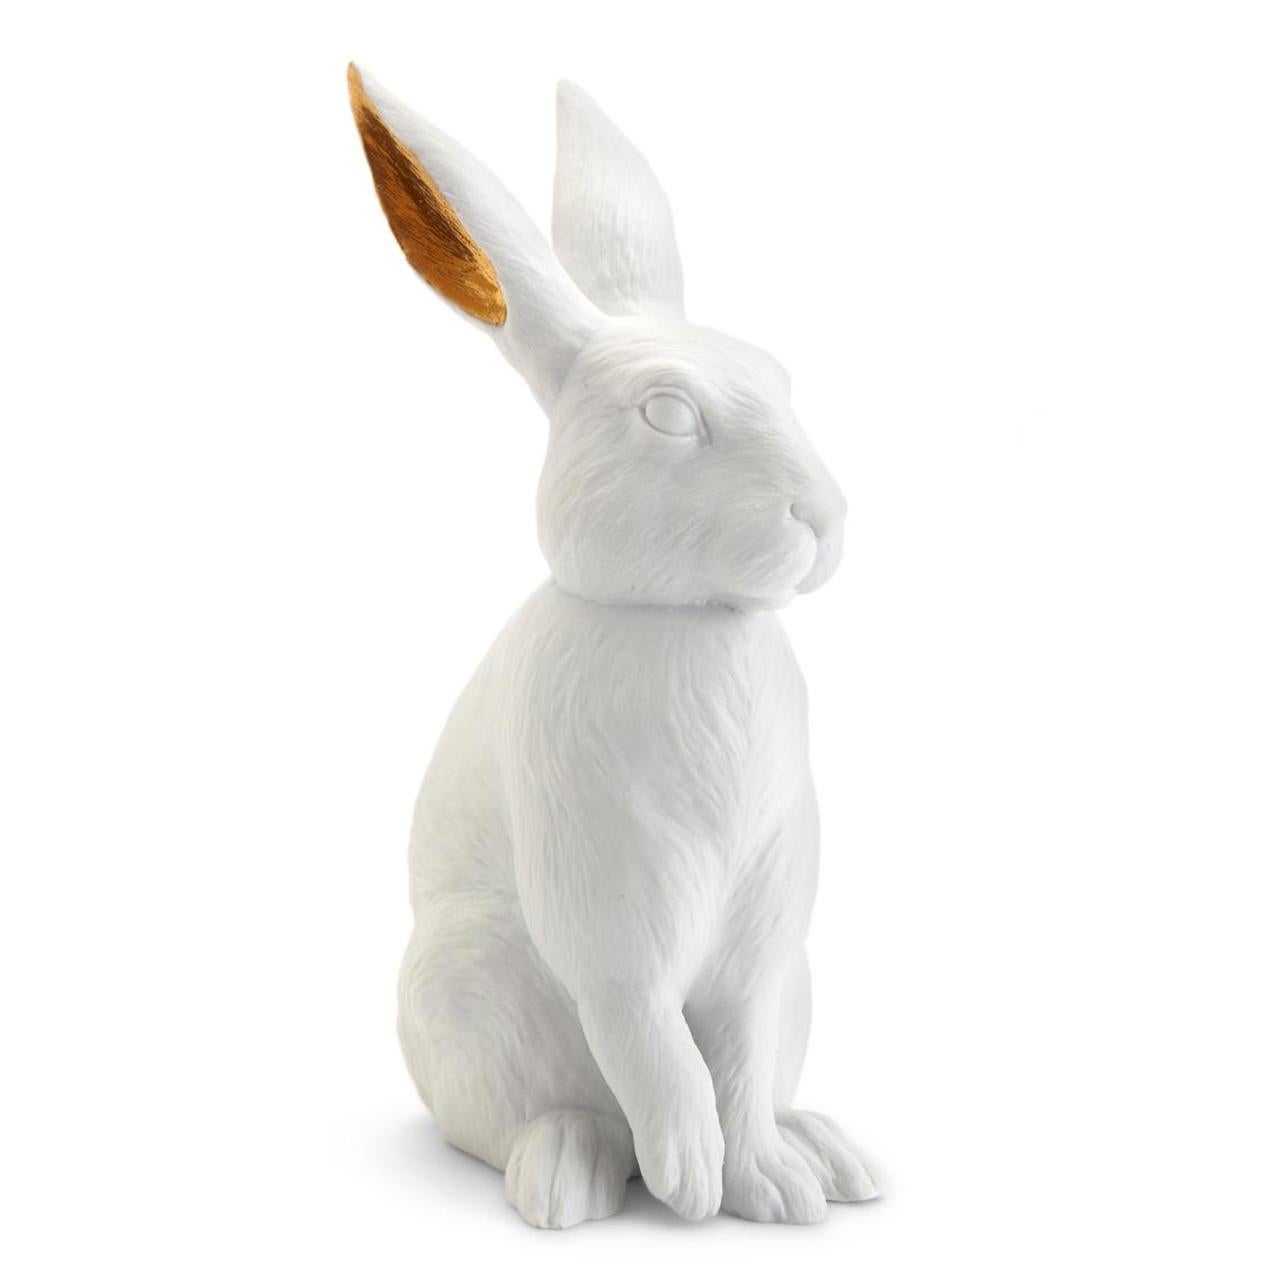 Sculpture white rabbit in porcelain
and with 24-karat golded ears.